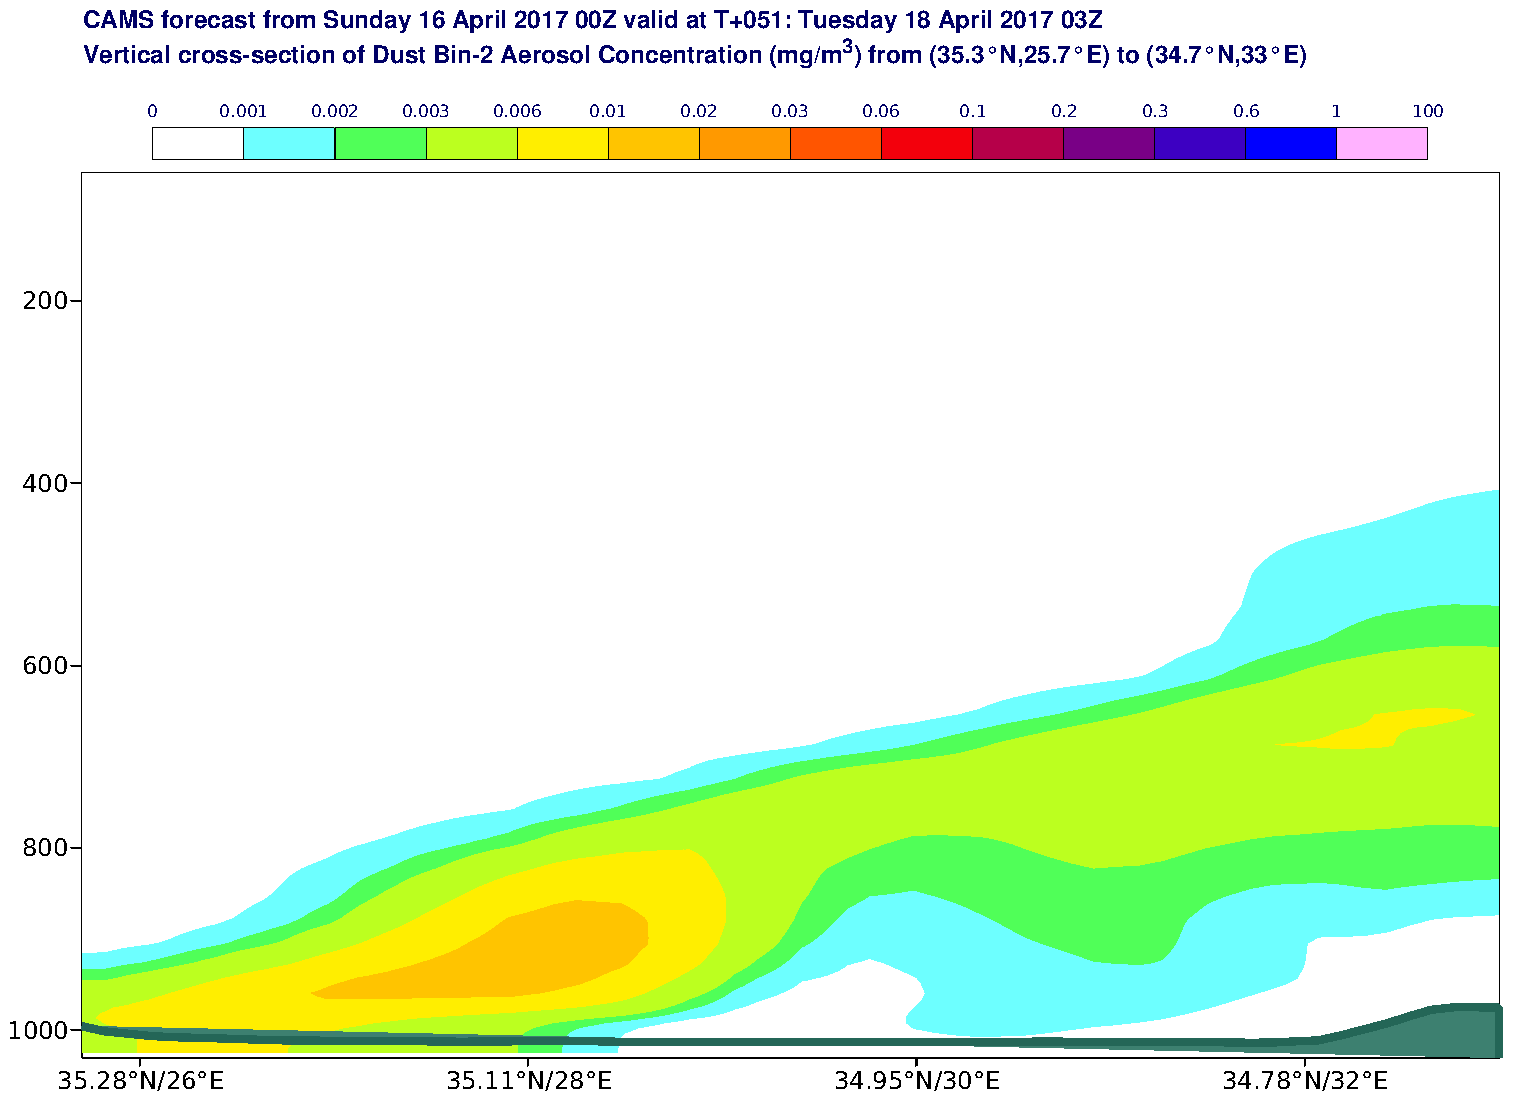 Vertical cross-section of Dust Bin-2 Aerosol Concentration (mg/m3) valid at T51 - 2017-04-18 03:00